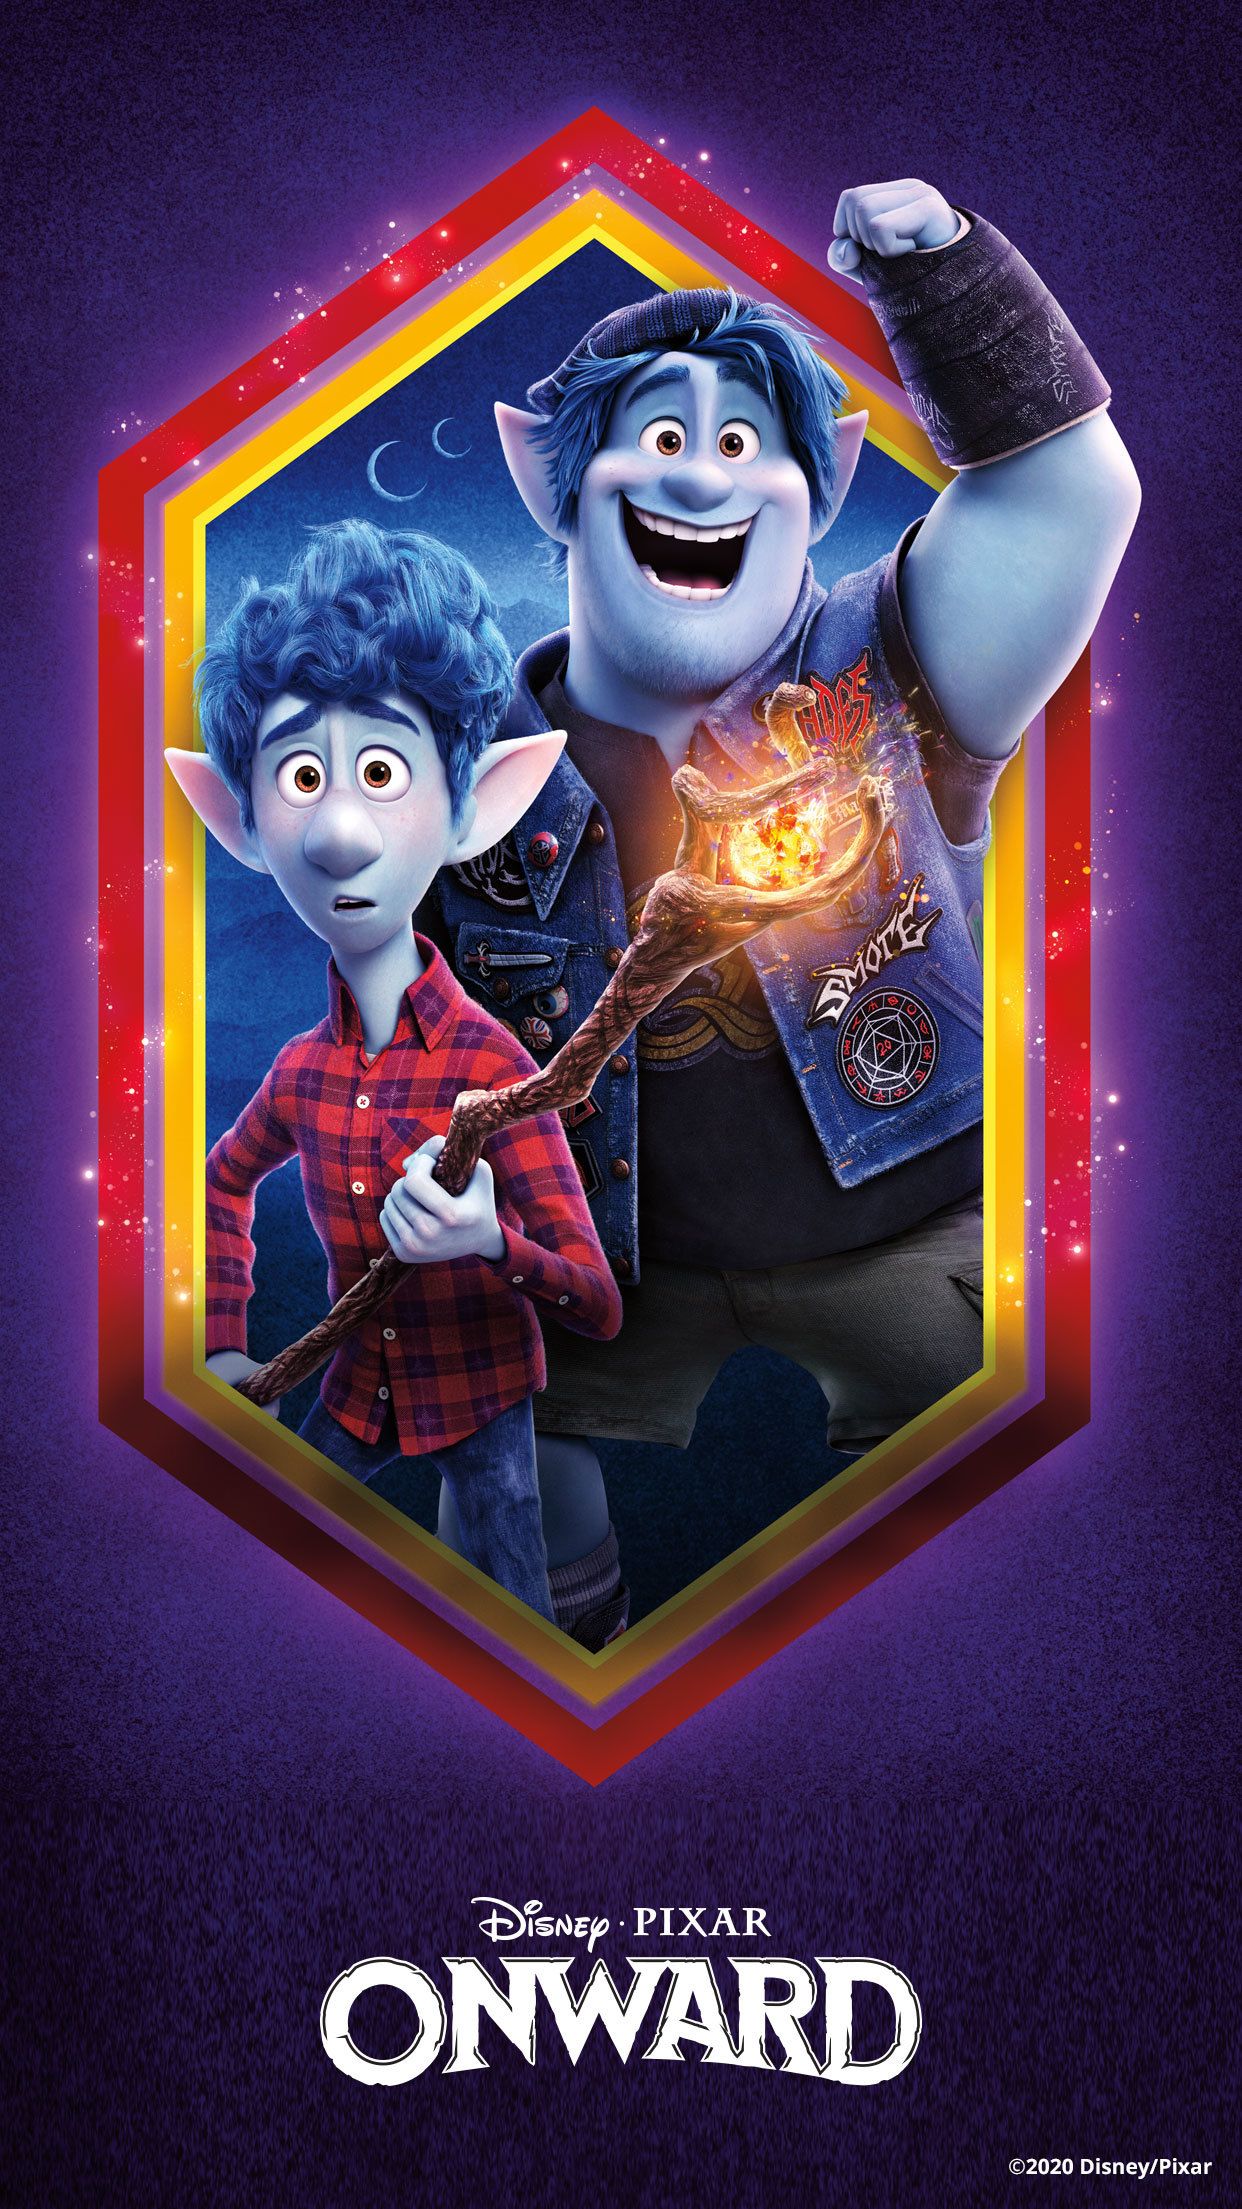 Bringeth Magic To Your Mobile Device With Disney And Pixar's